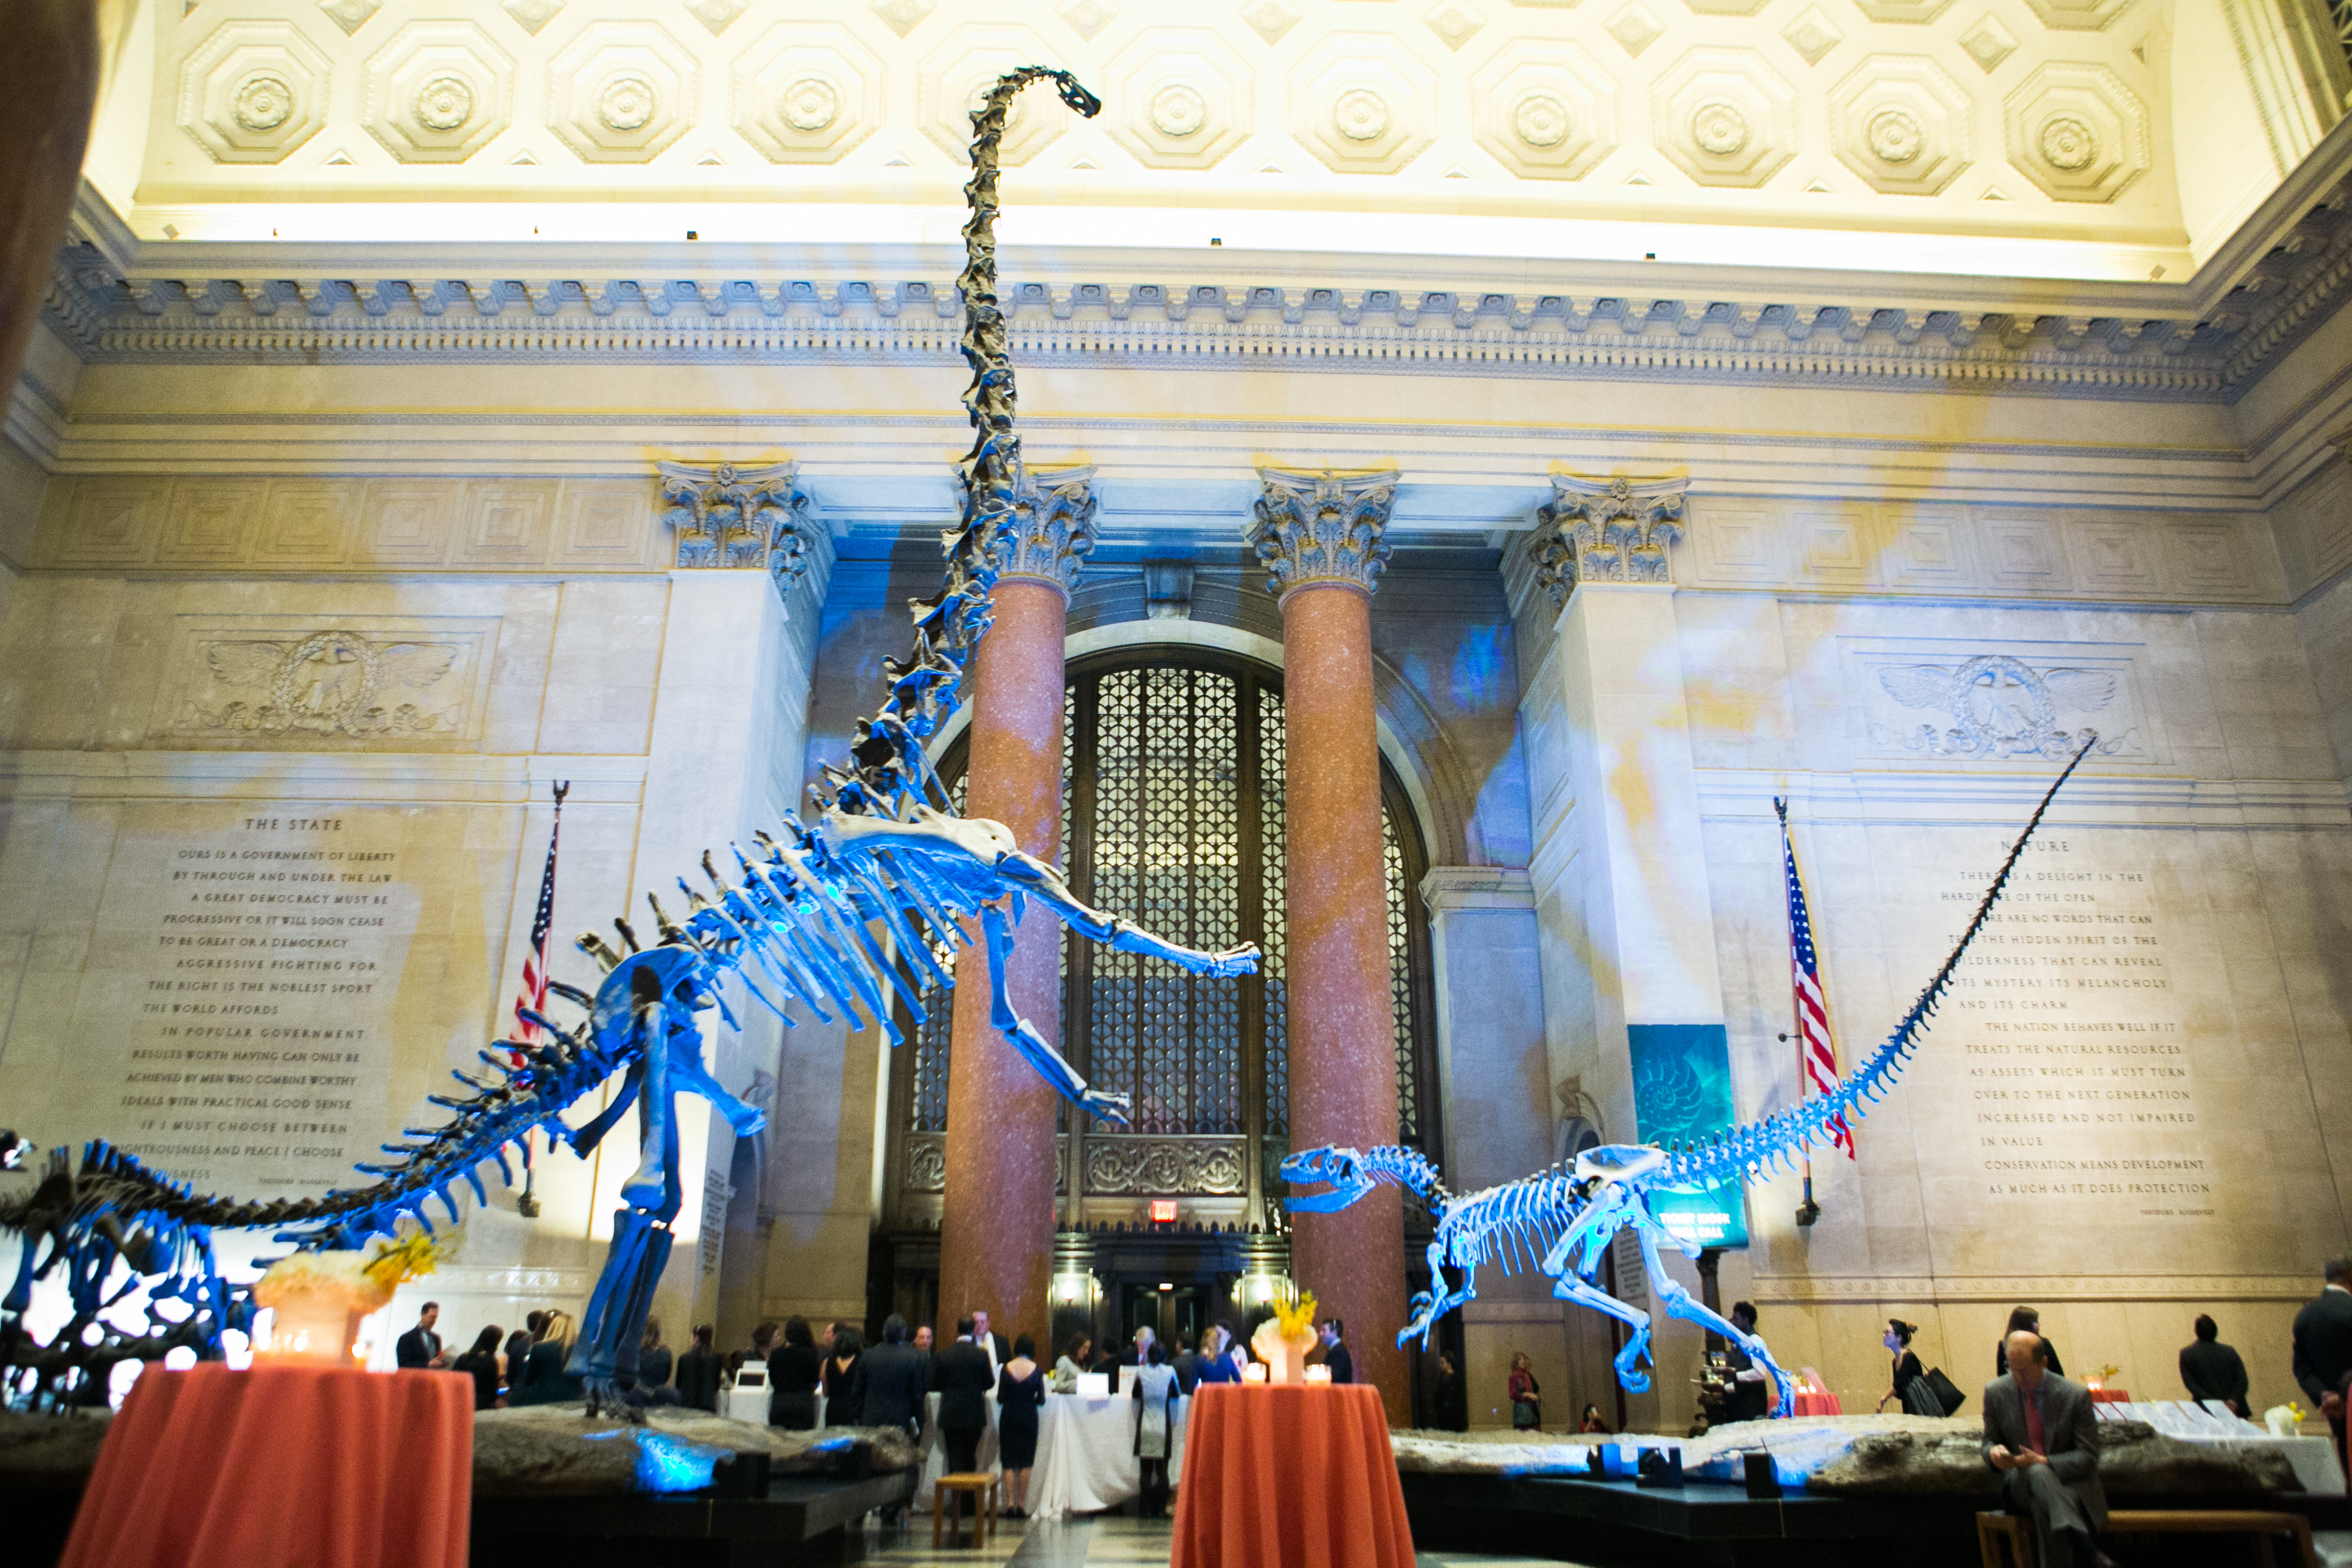 National Museum of Natural History in Washington, D.C.